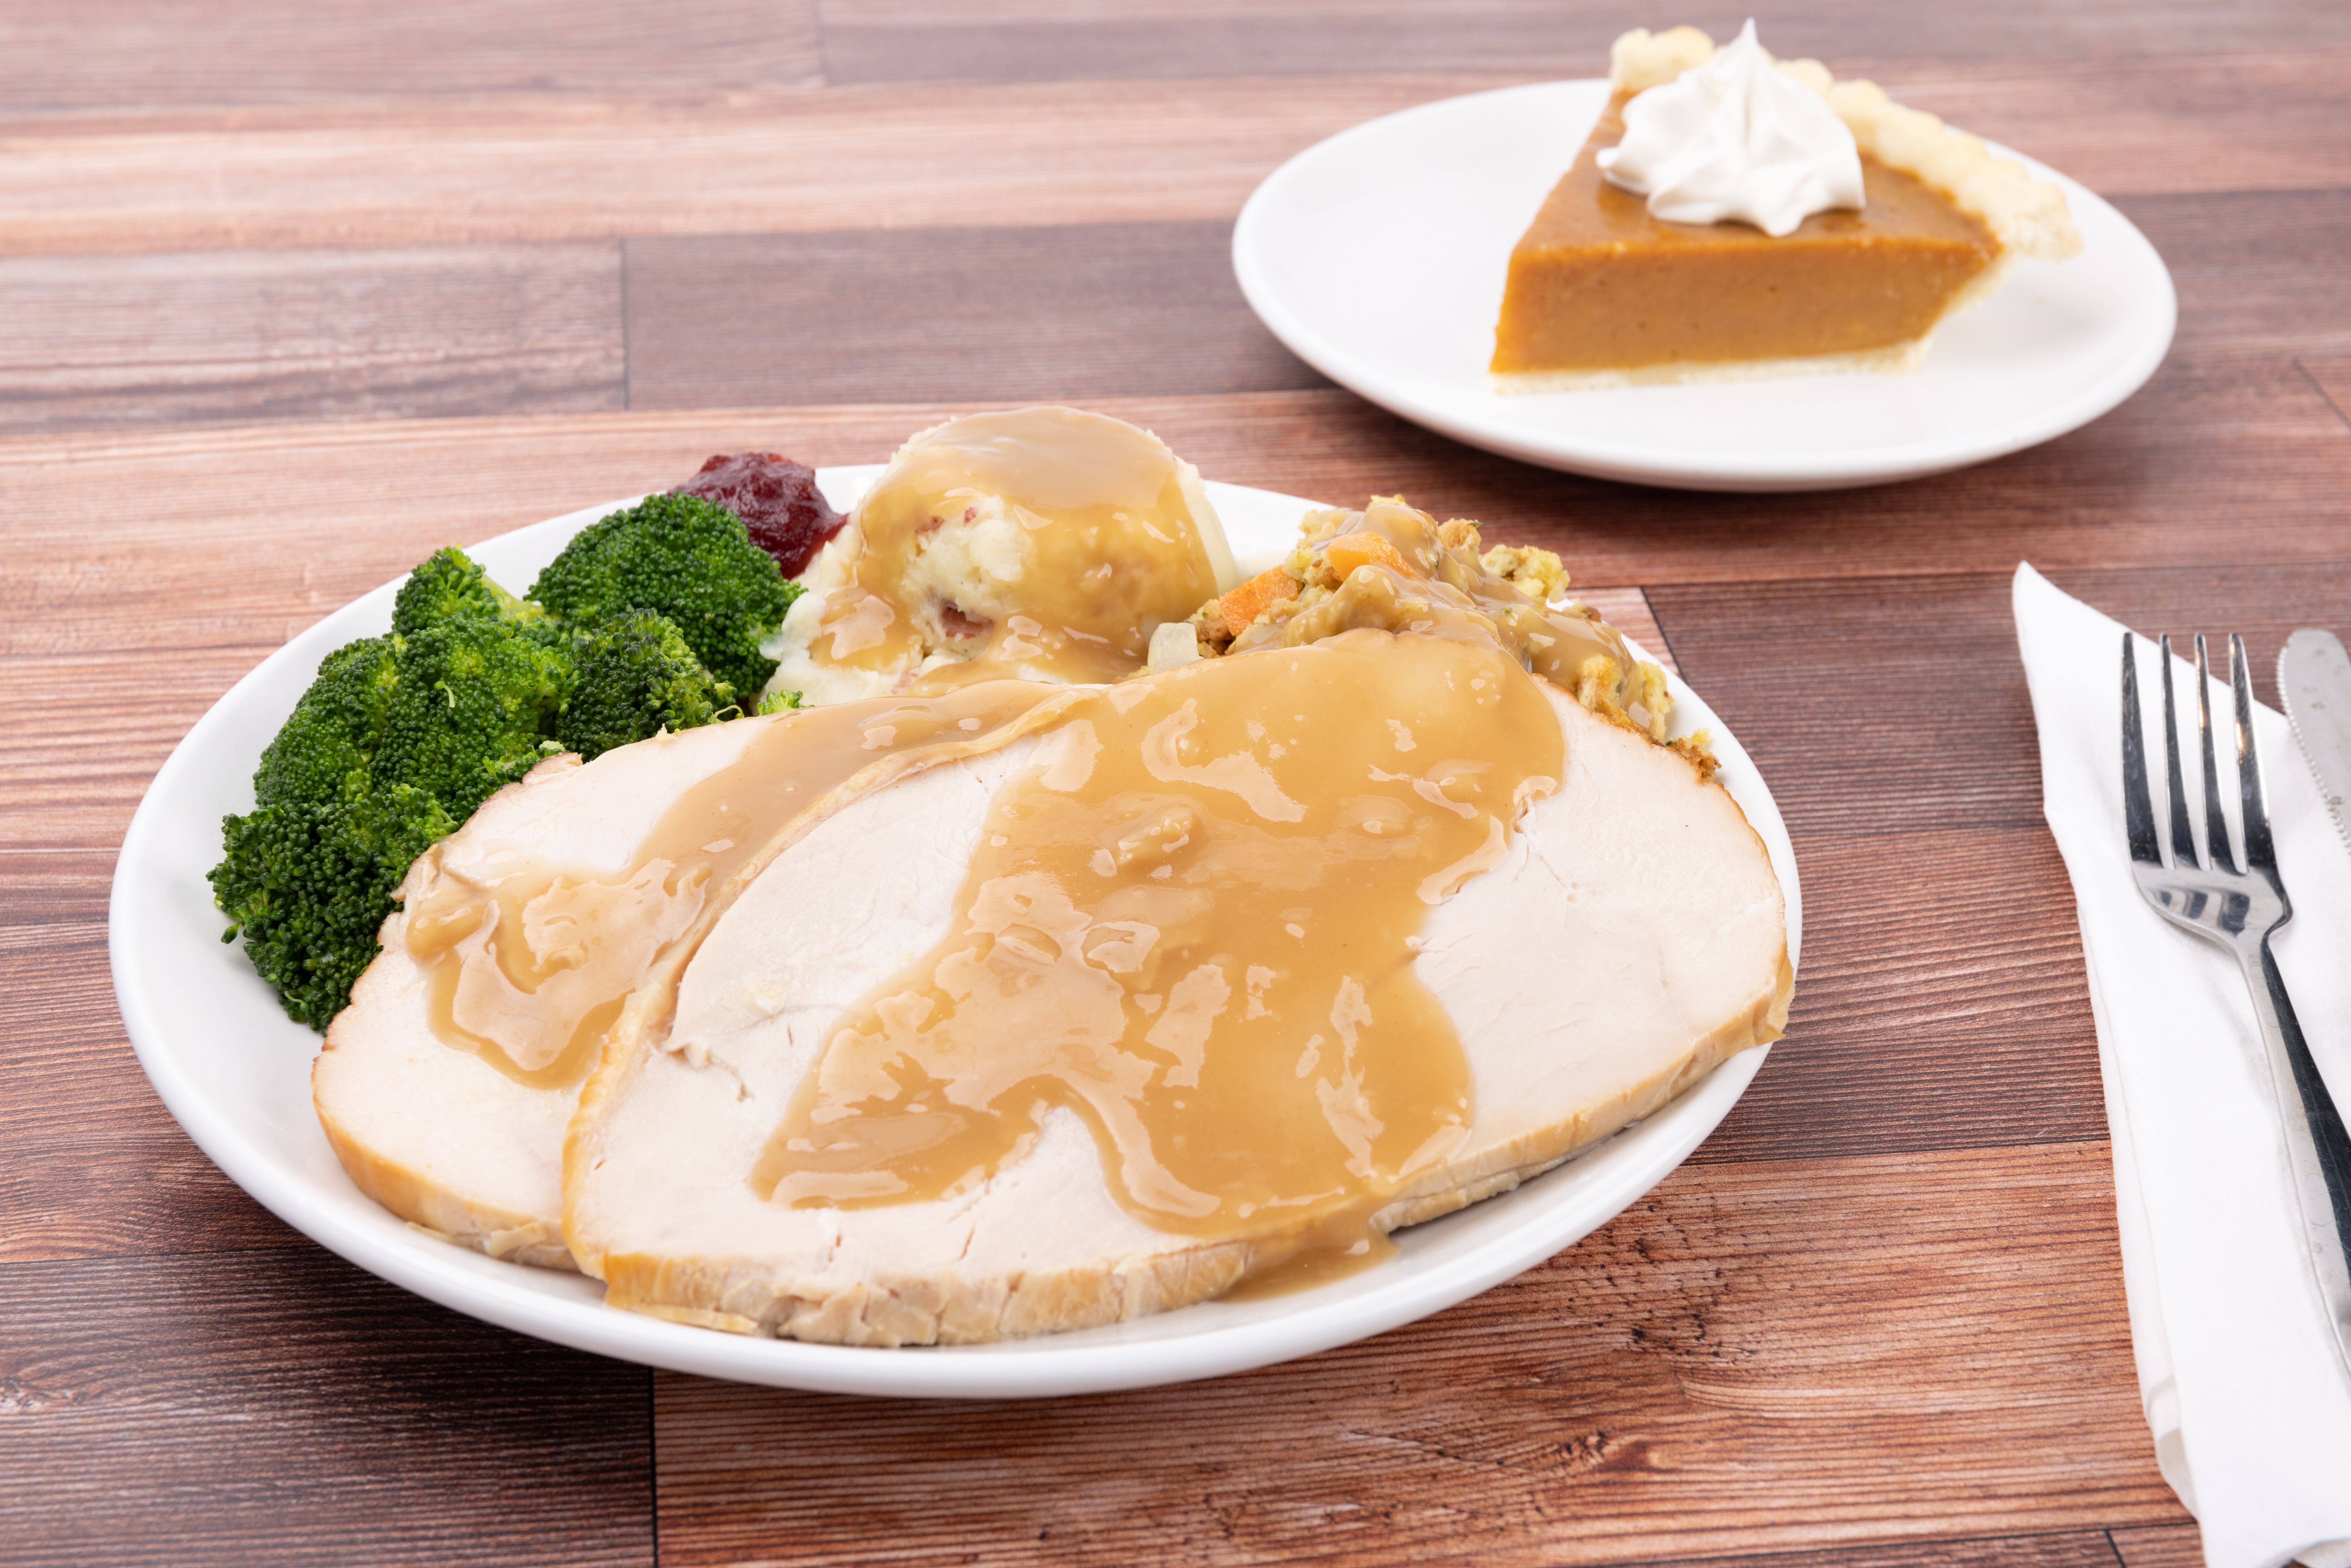 39 Tampa Bay restaurants offering special Thanksgiving meals to